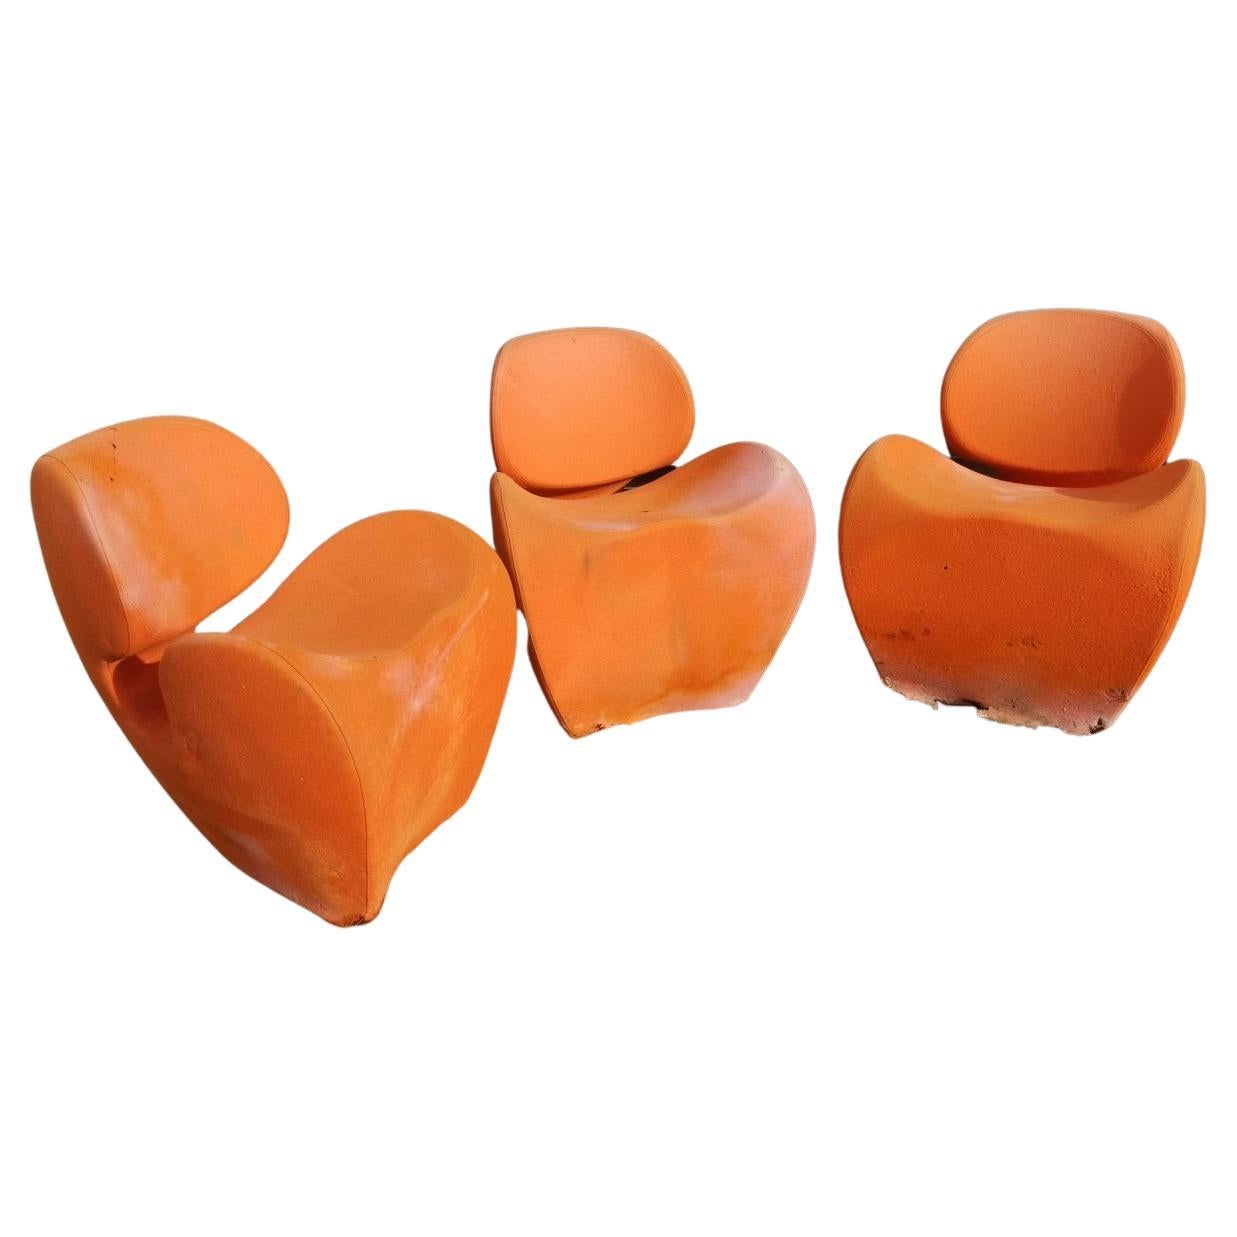 Ron Arad circa 1991, Four Soft Big Heavy Orange Armchairs Made by Moroso, Italy For Sale